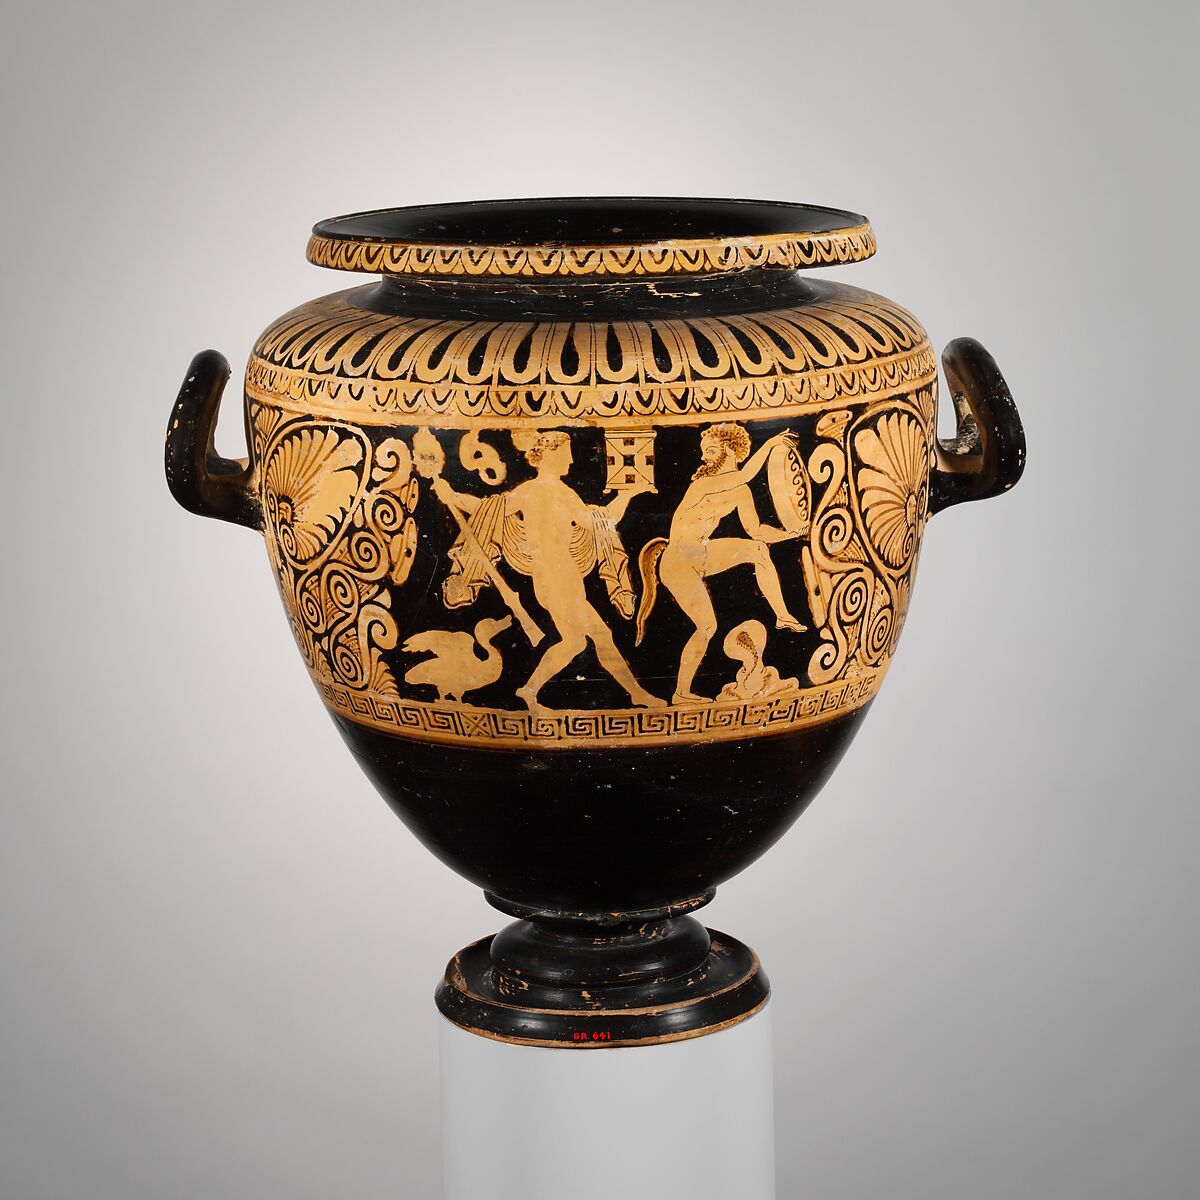 Terracotta stamnos (jar), Attributed to the Captives Group, Terracotta, Faliscan 